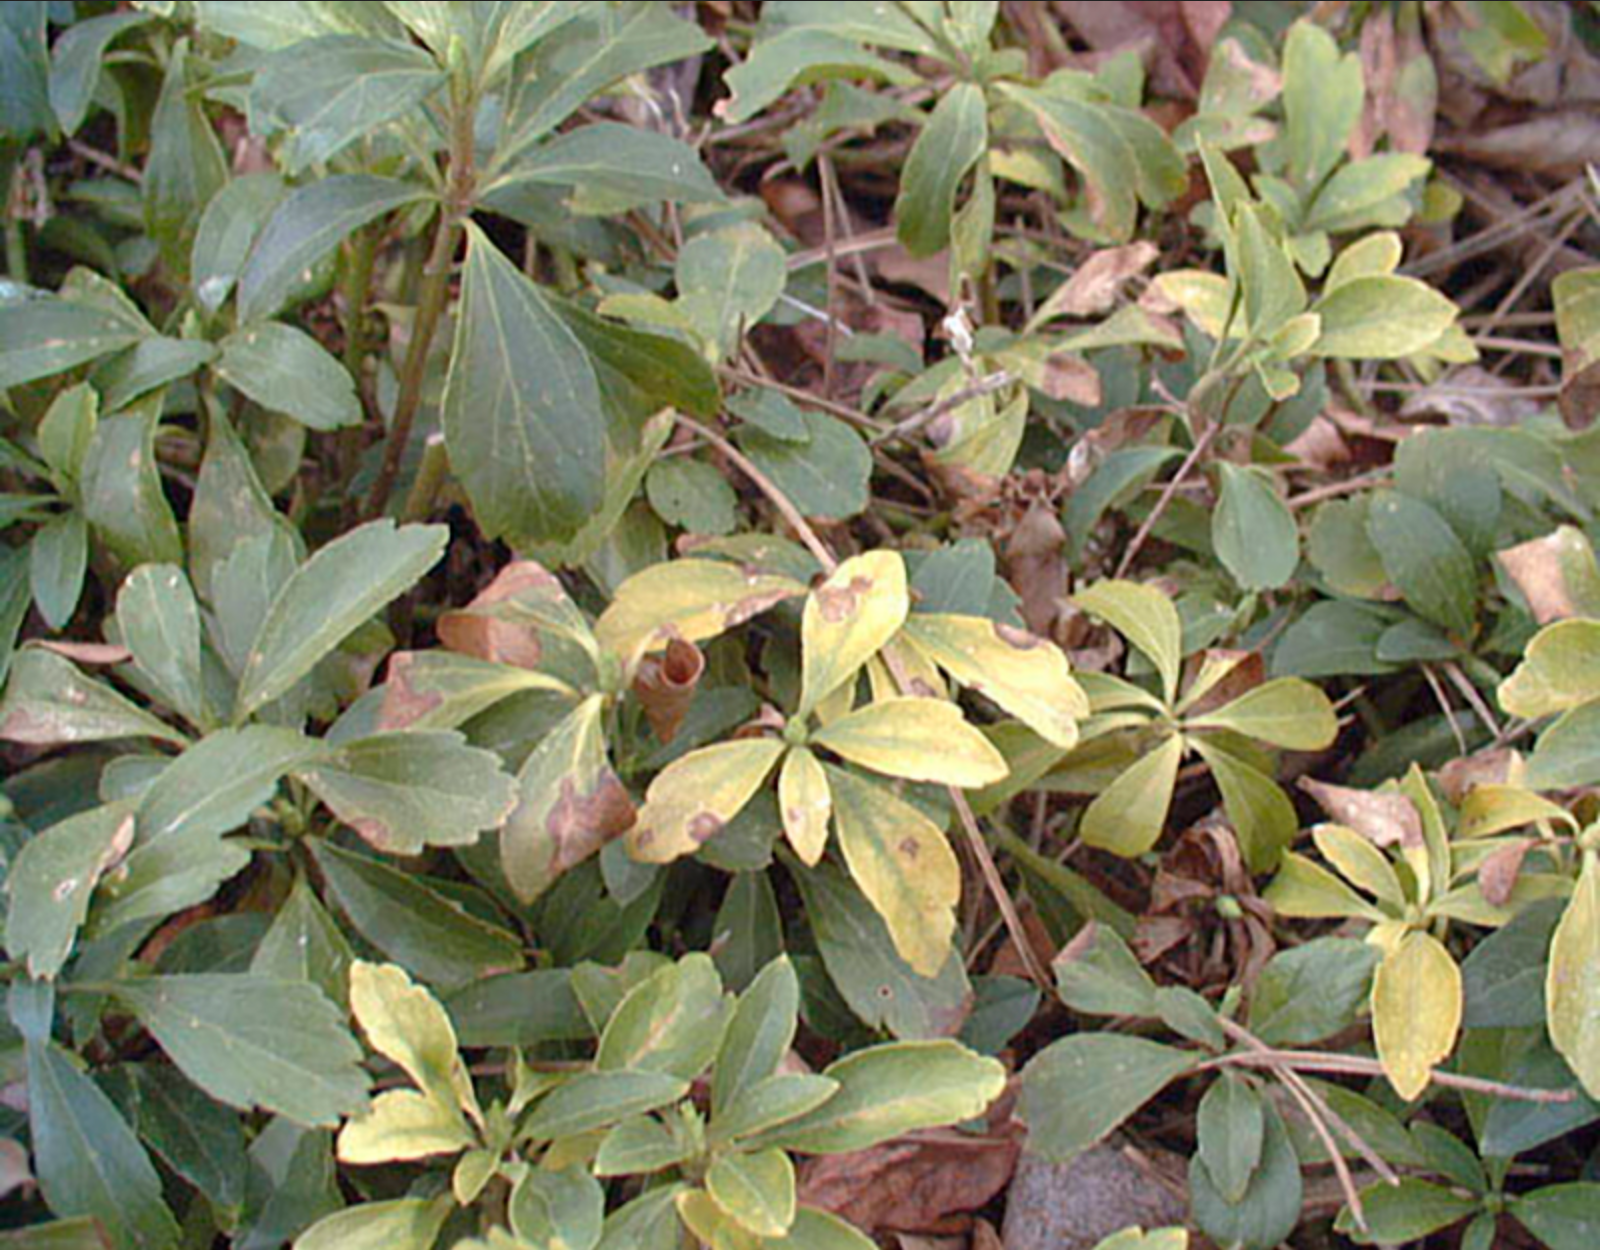 Overall picture of pachysandra